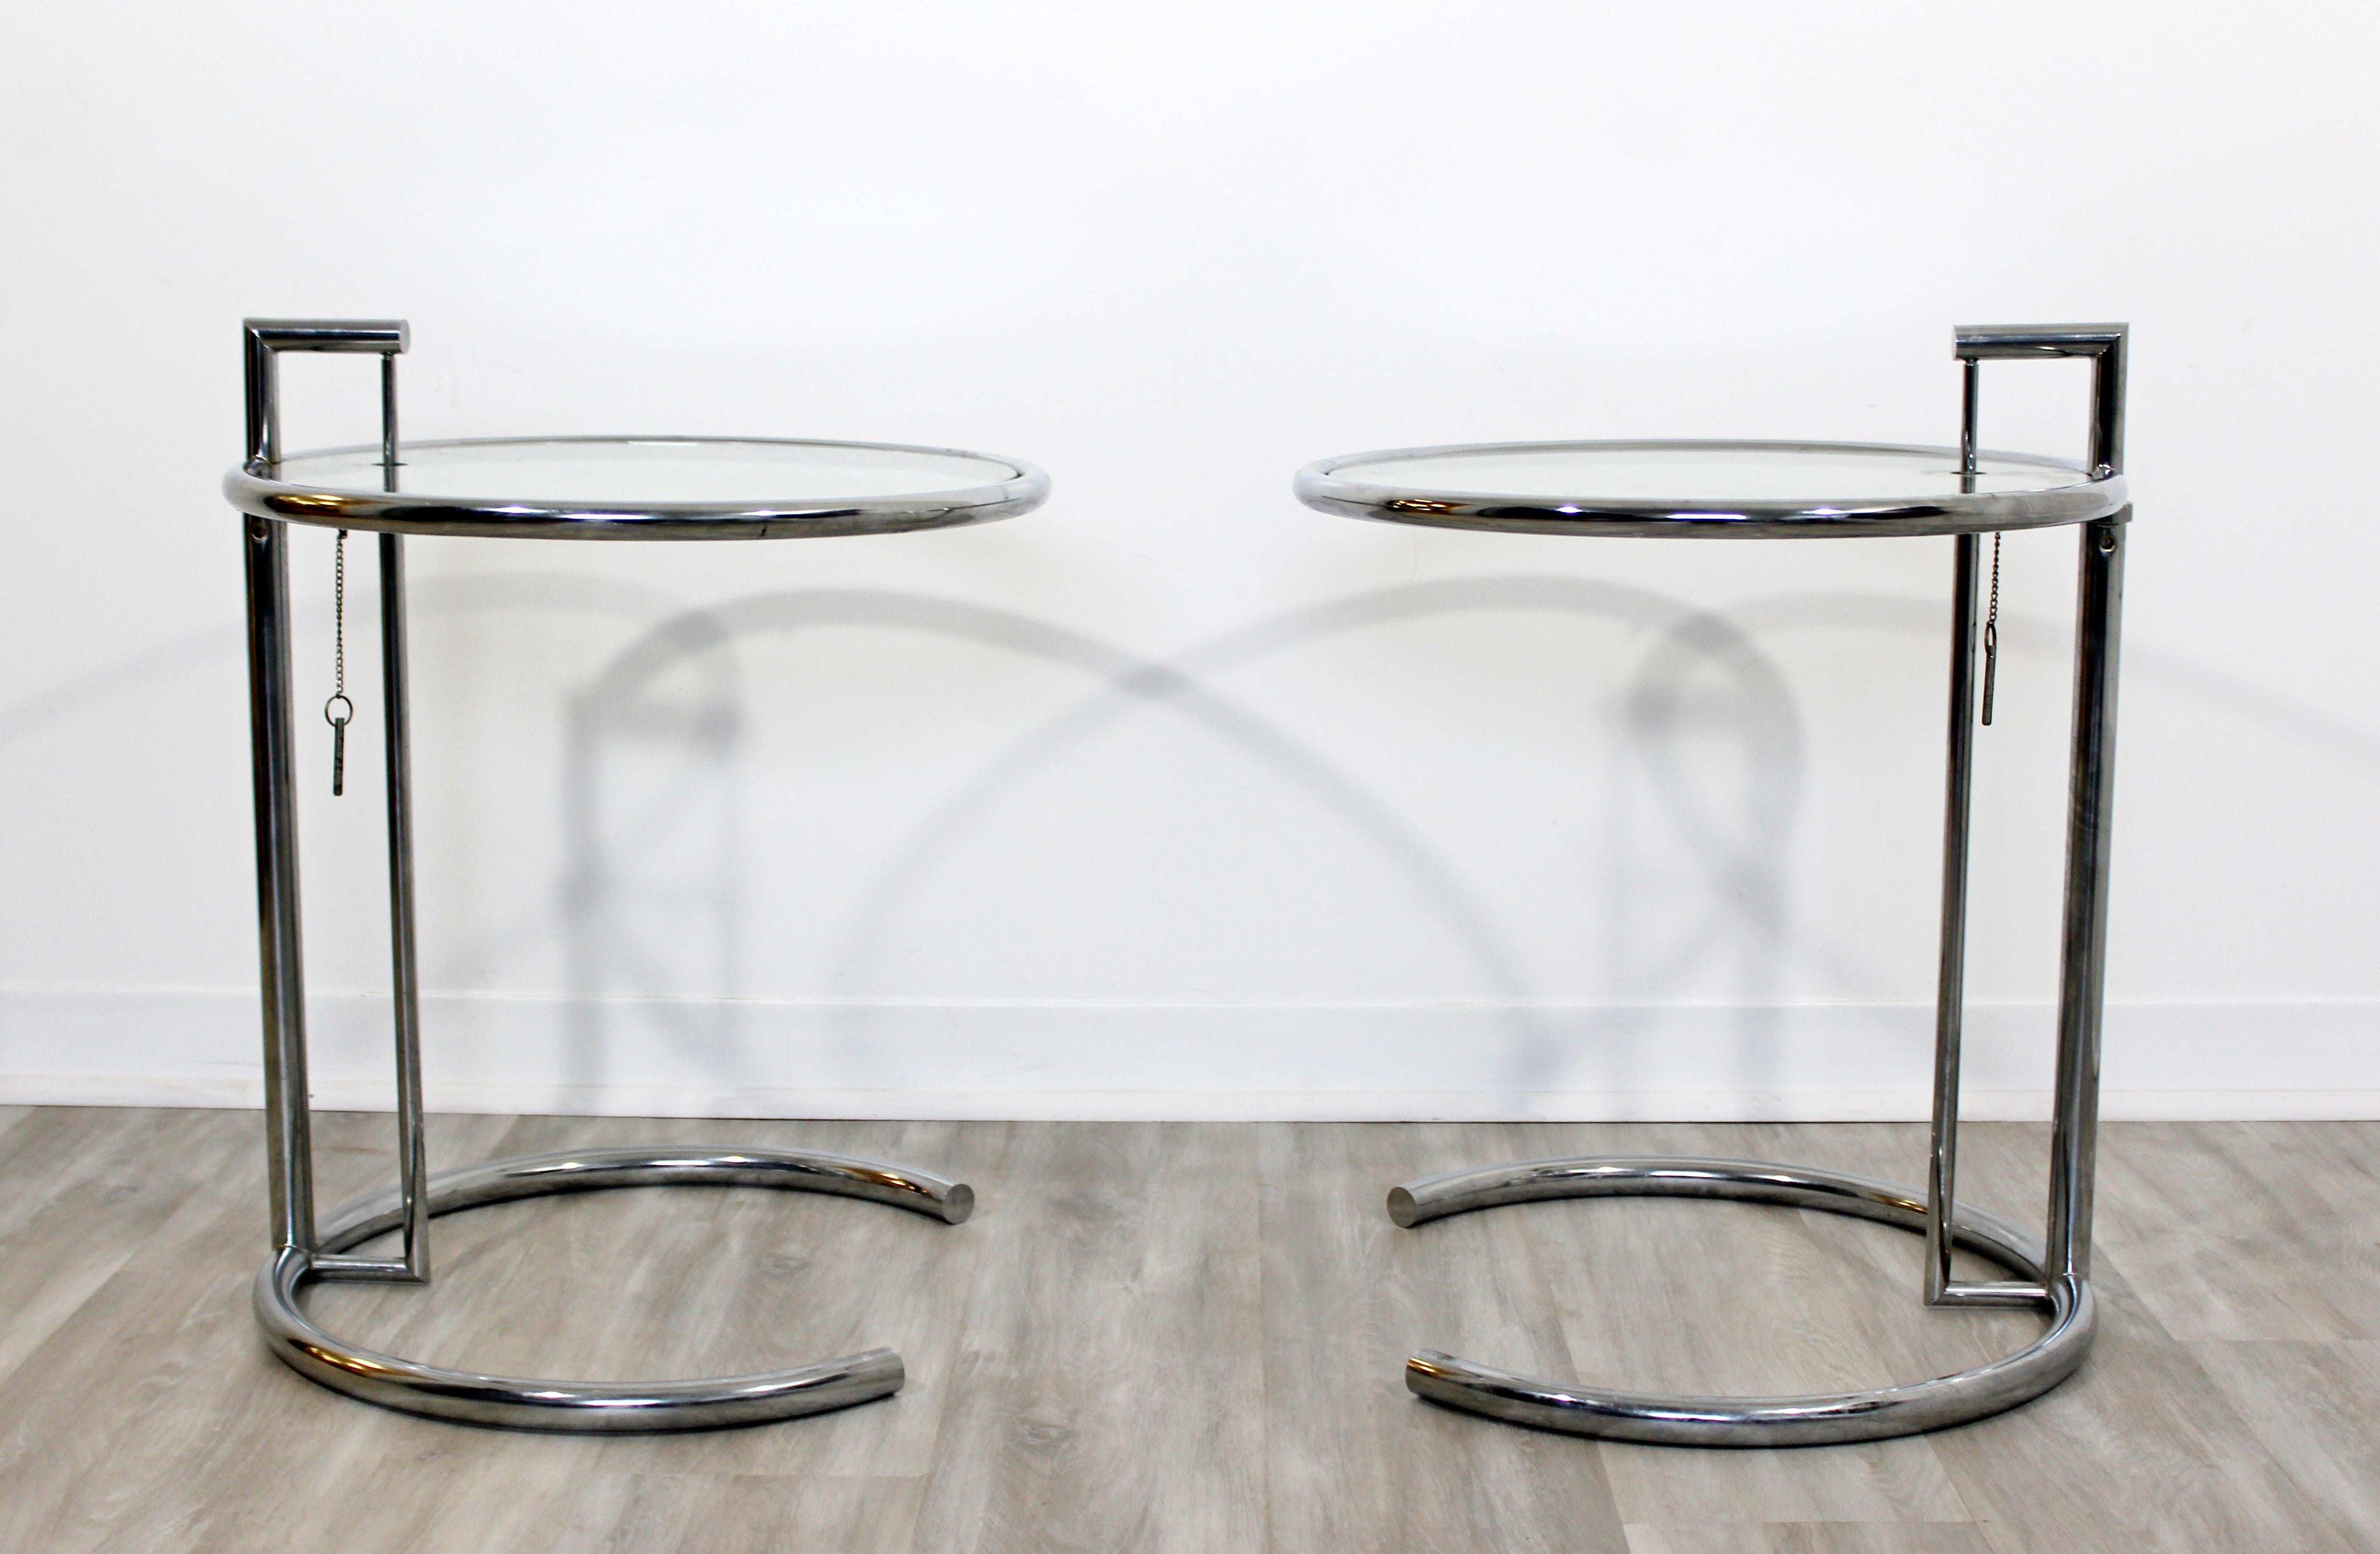 For your consideration is a gorgeous pair of adjustable, round, side or end tables, made of chrome and with glass tops, by Eileen Gray, circa 1960s. In good vintage condition, with a chip in one of the glass tops. The dimensions of each are 20